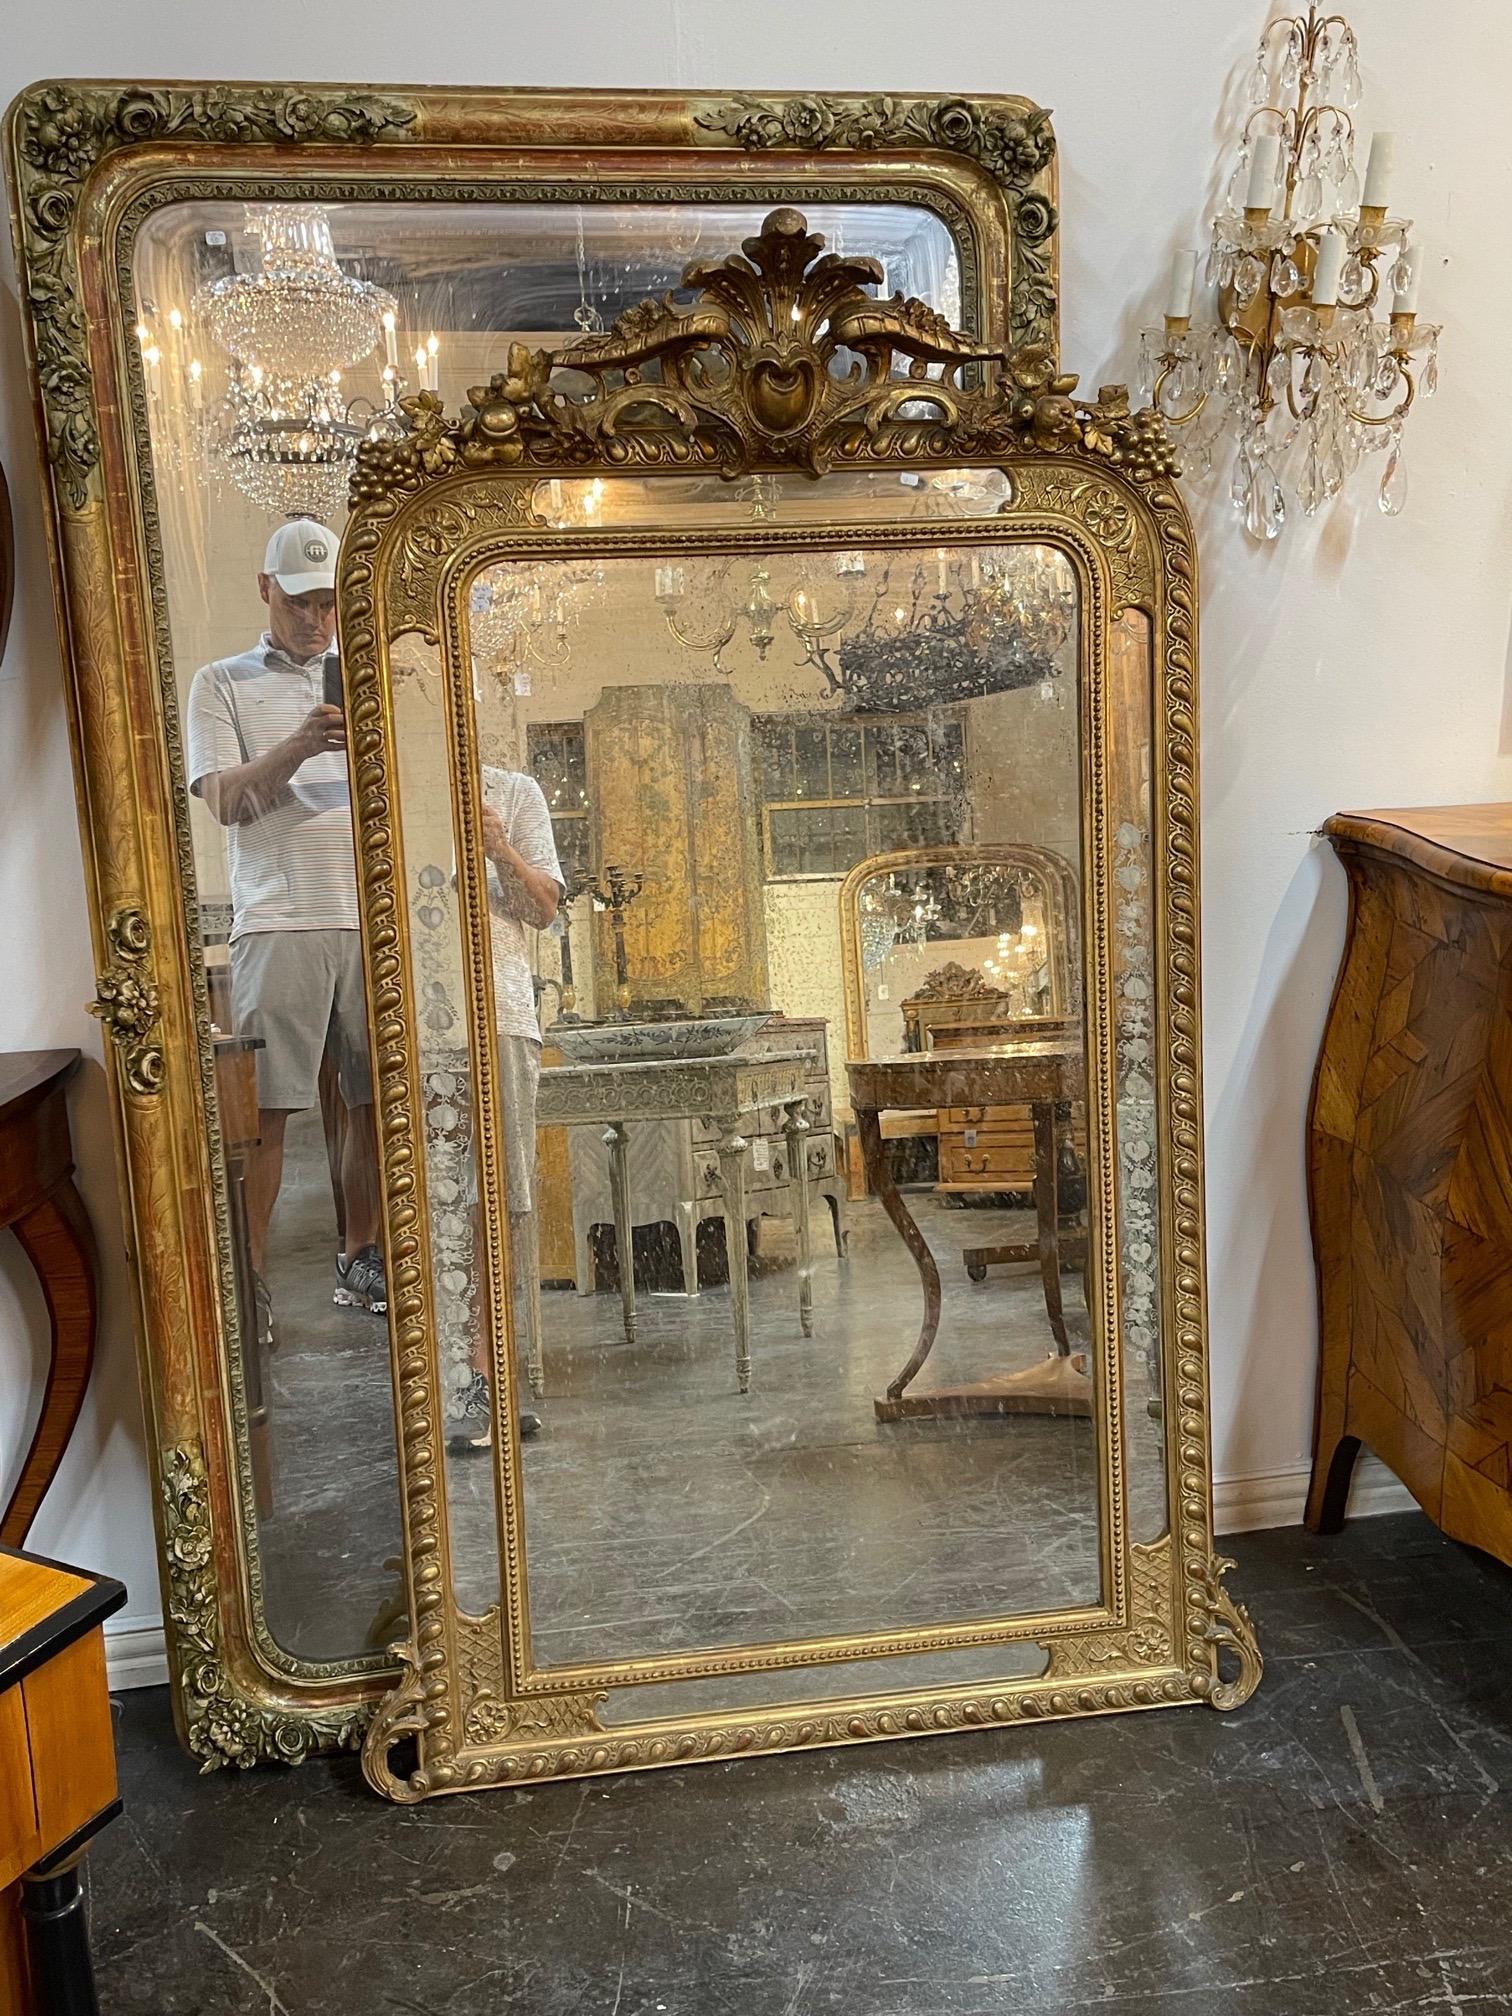 Elegant large 19th century French Louis XVI style giltwood mirror. Beautiful intricate carvings including an elaborate crest at the top. And pretty etched glass as well. Extra special!!